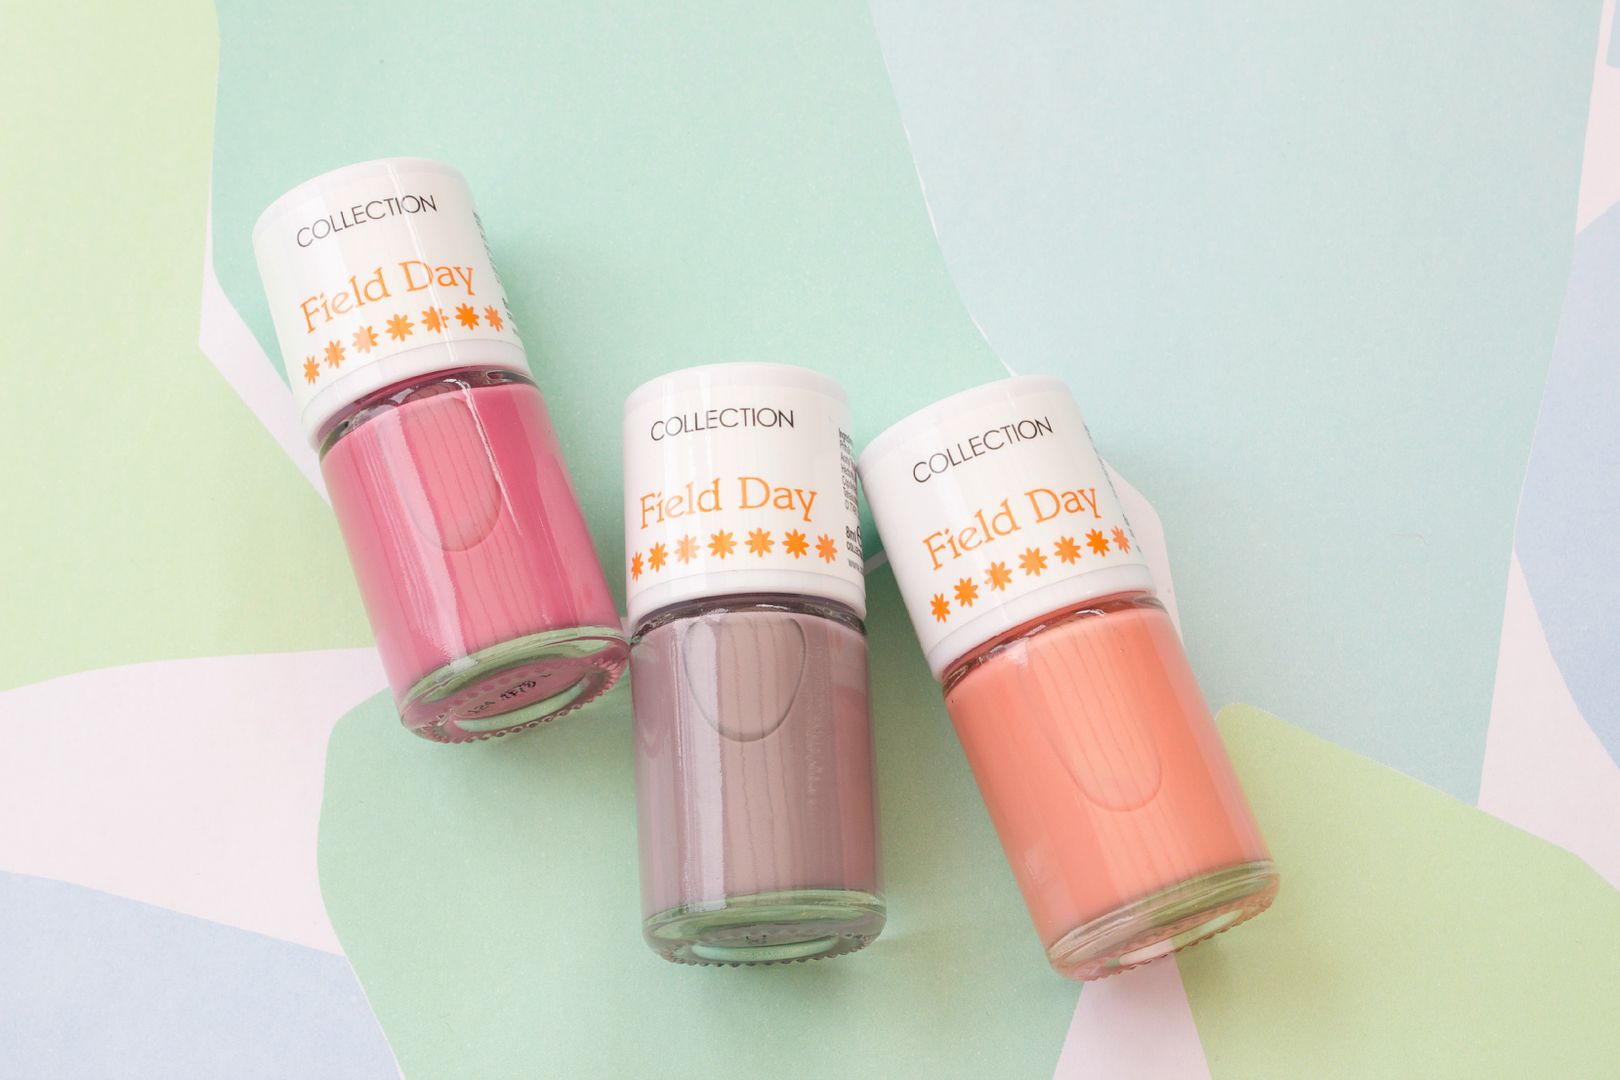 Collection Field Day Nail Polish